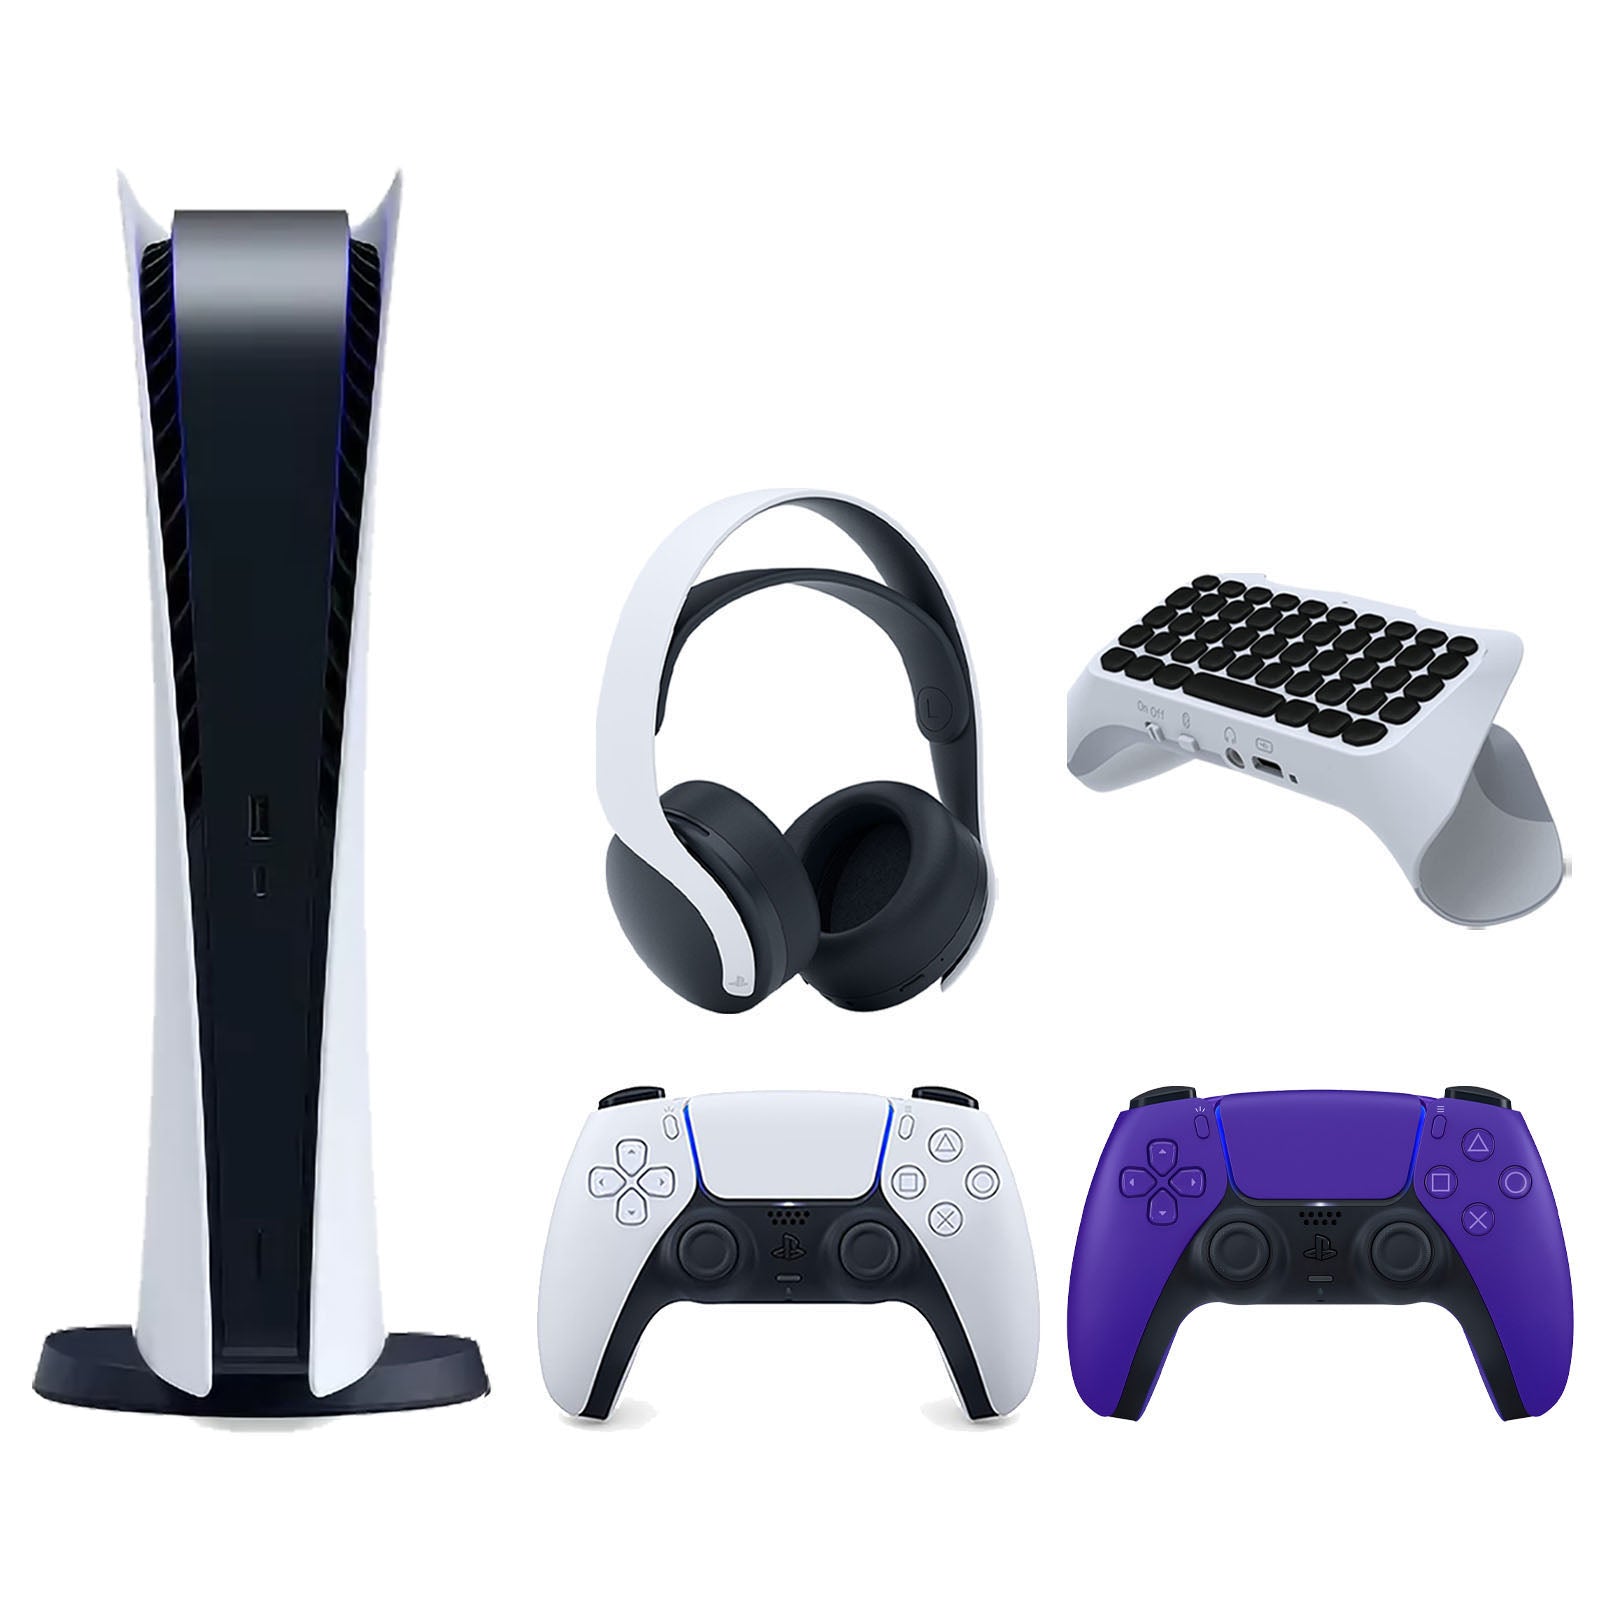 SONY PS5 Digital Console with Extra Purple Dualsense Controller and  Accessories Kit